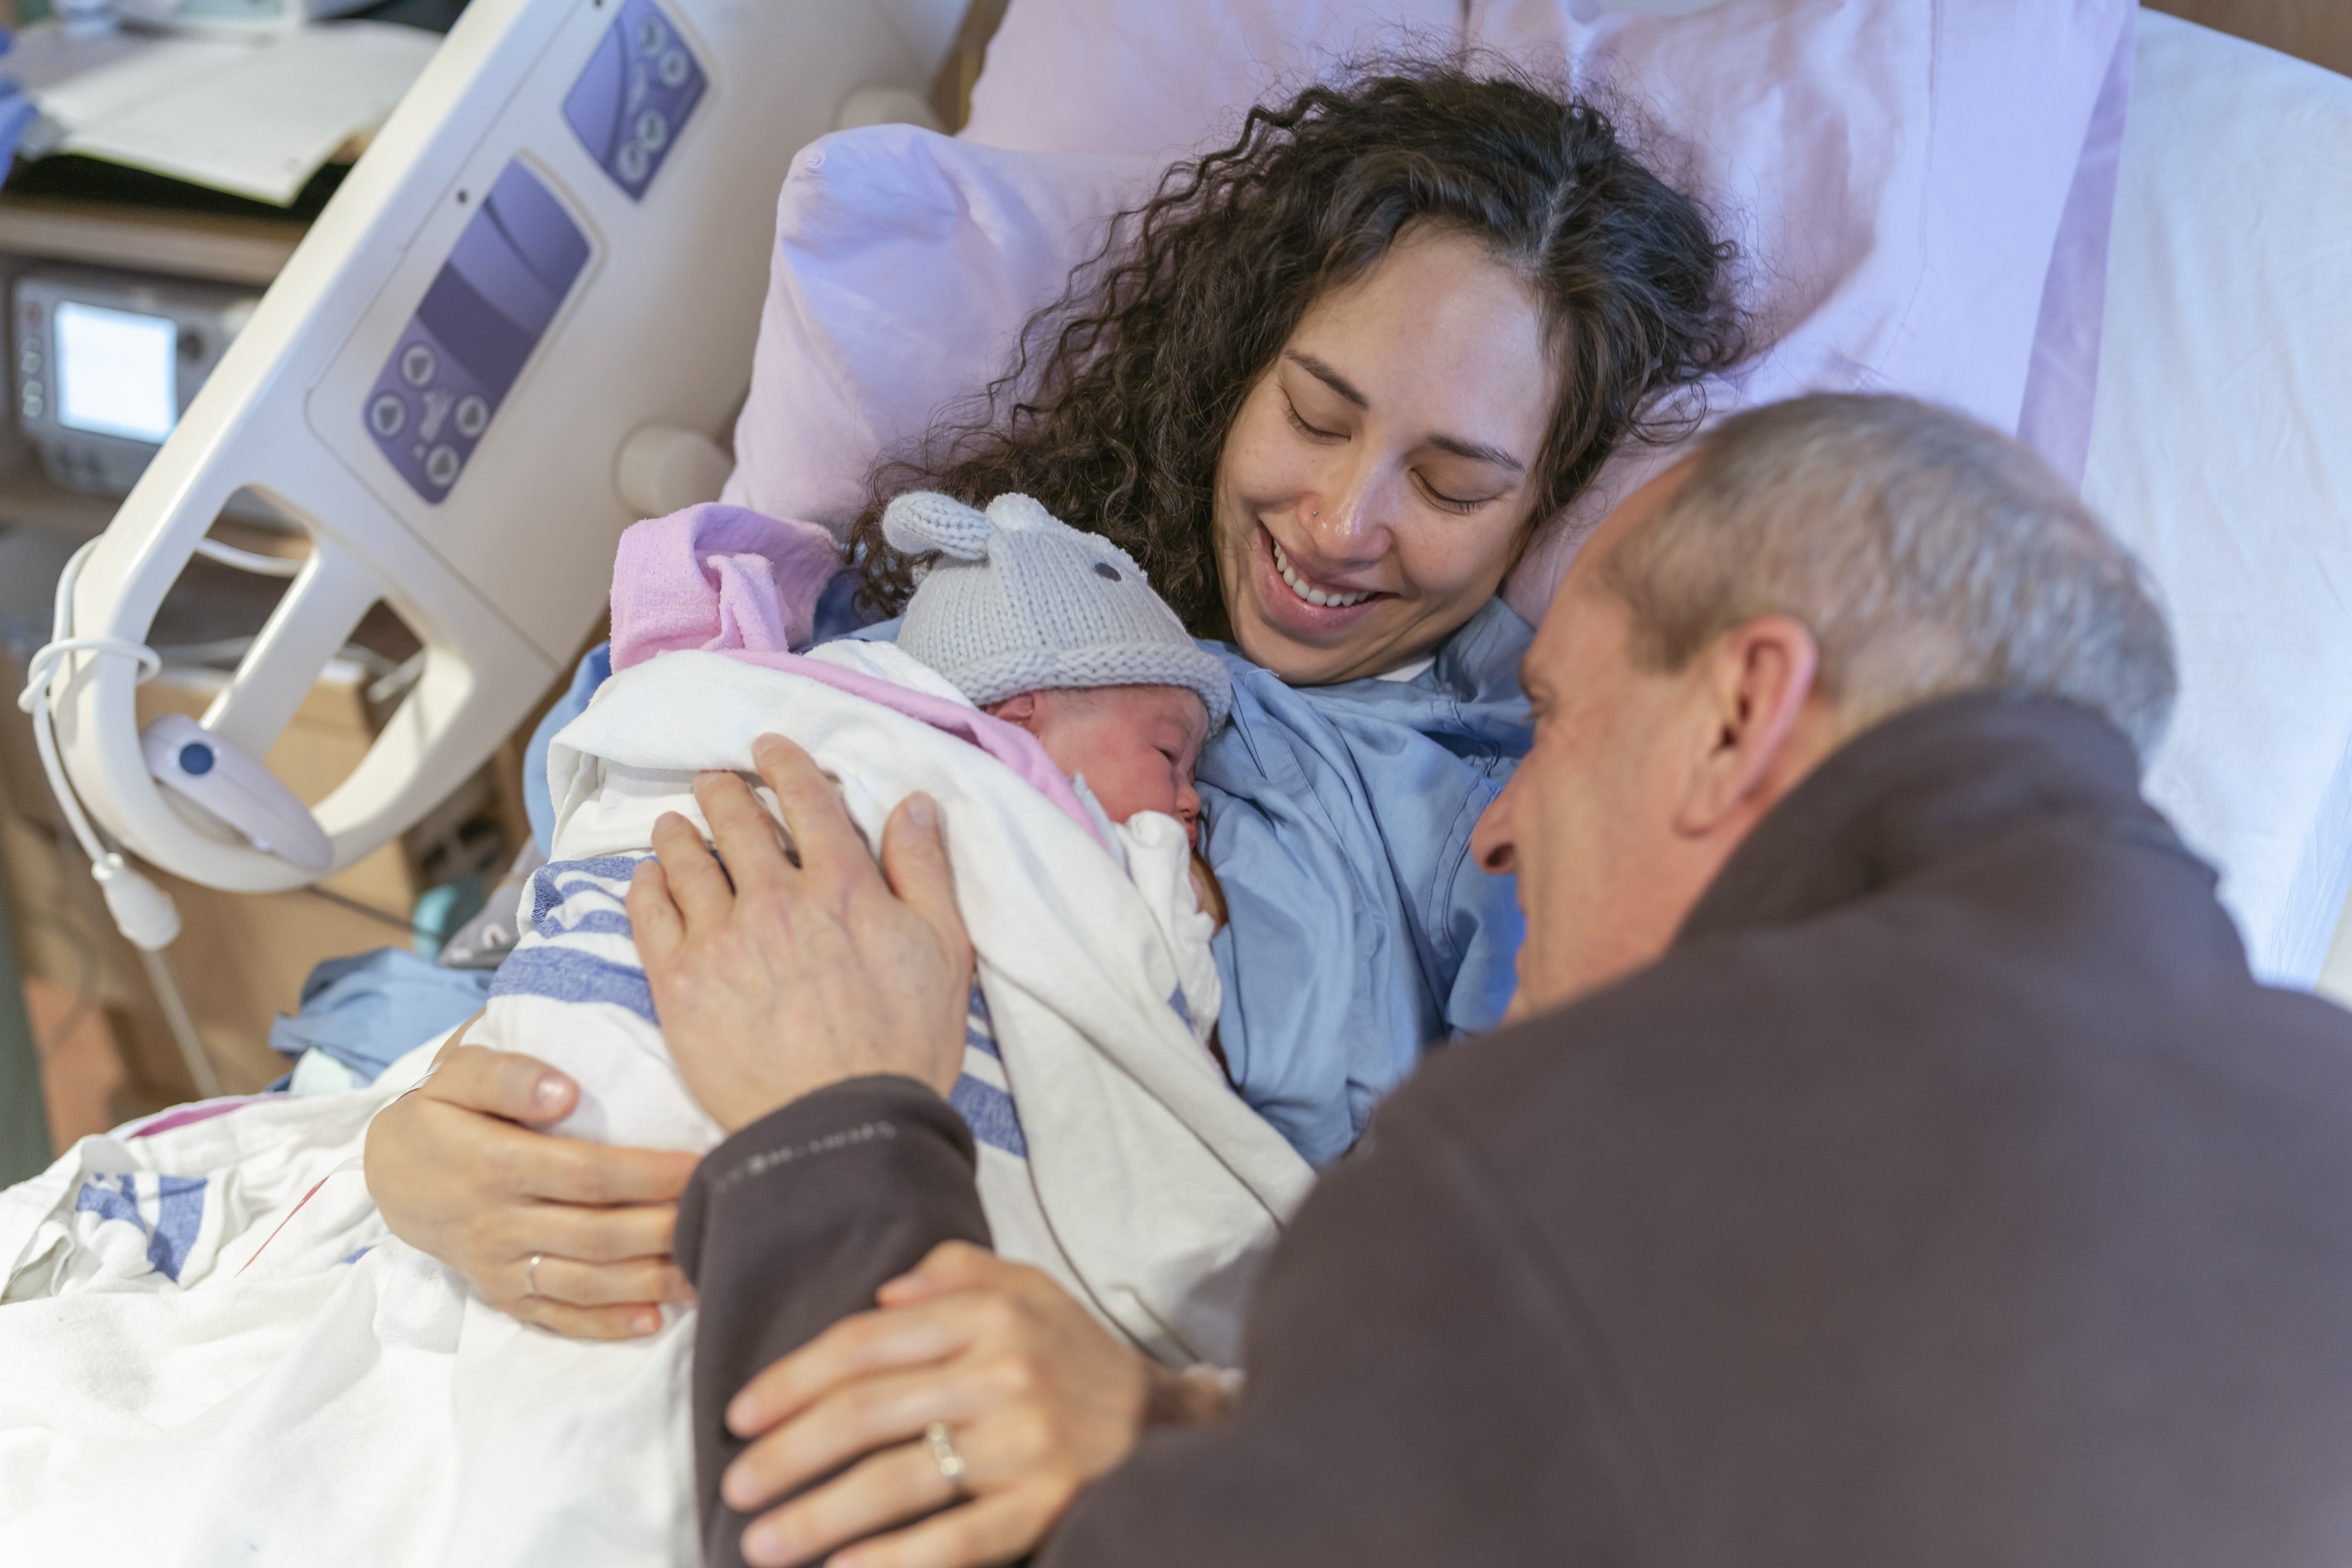 A photo of a caucasian grandpa who is emotional and happy while seeing his newborn granddaughter for the first time in the hospital room. He is looking at the baby and smiling while his daughter and the baby's mother are lying down together.